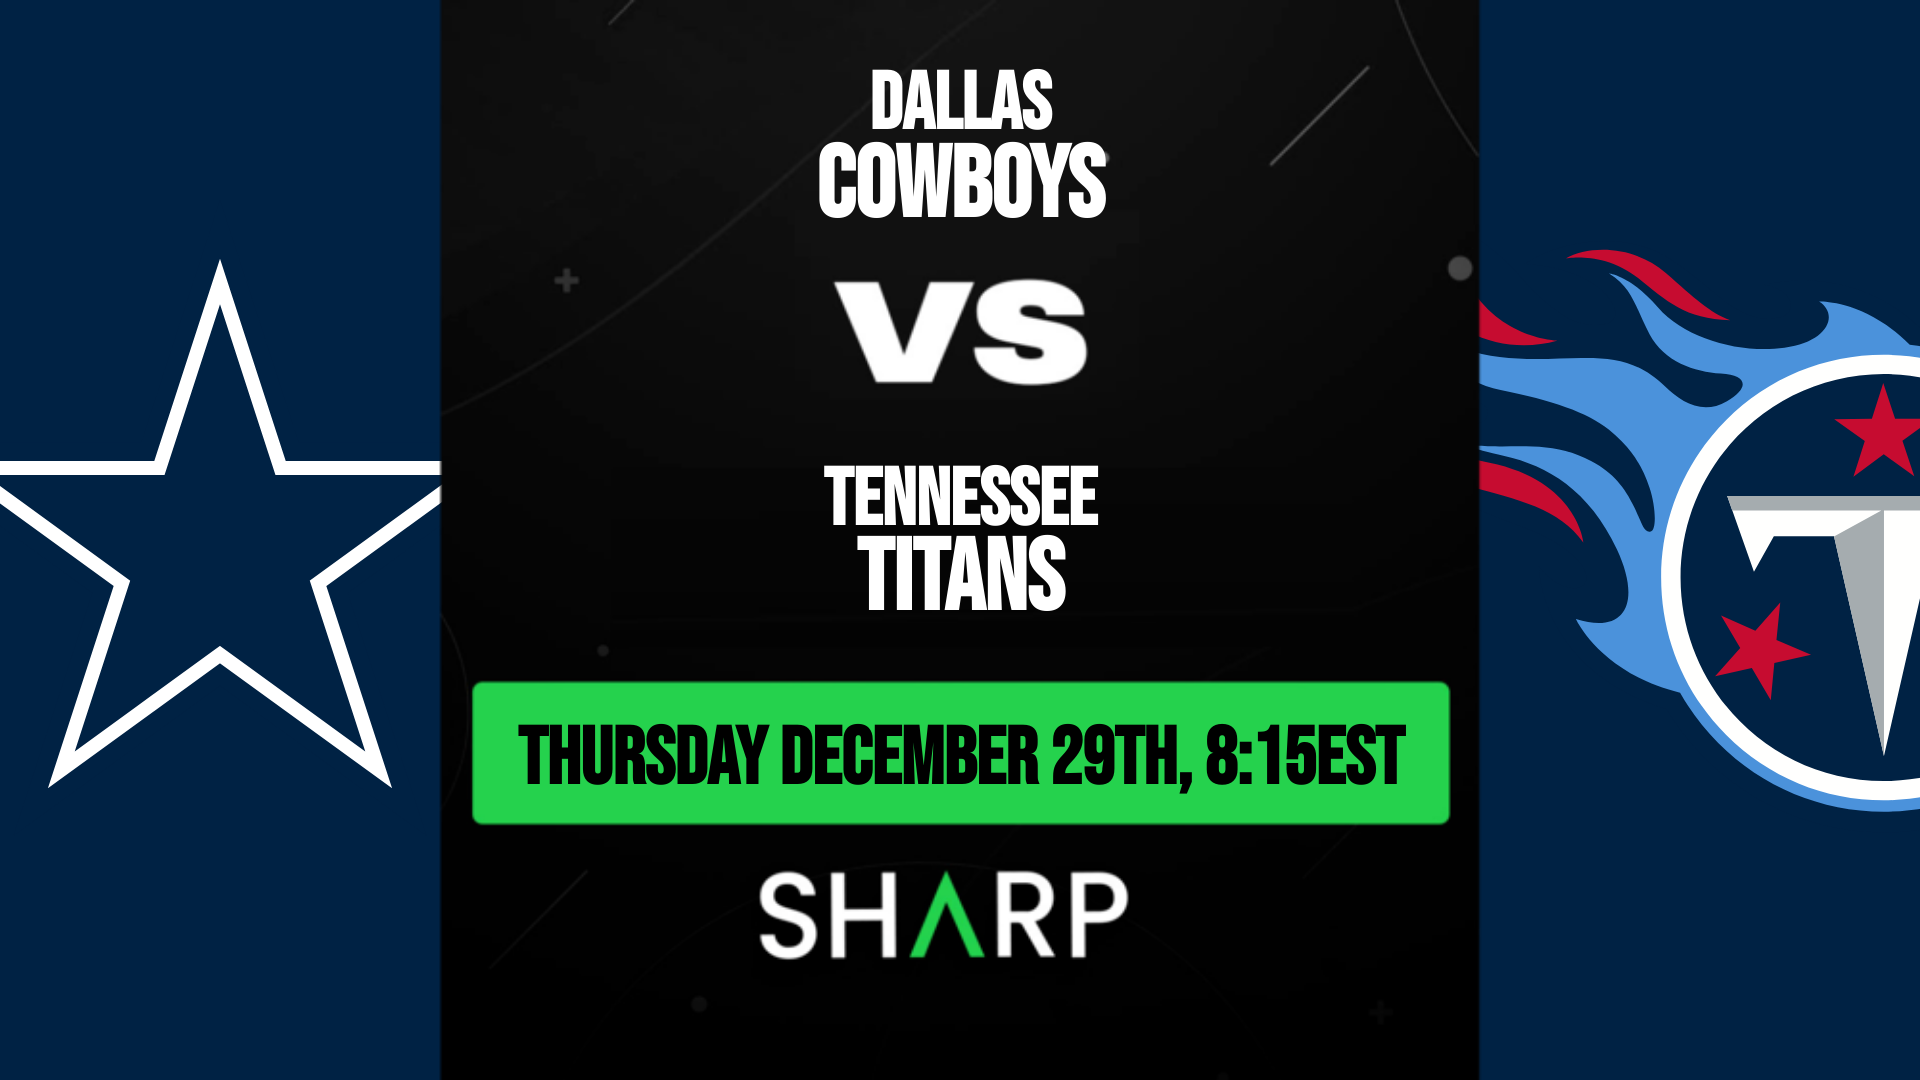 Dallas Cowboys vs Tennessee Titans Matchup Preview - December 29th, 2022